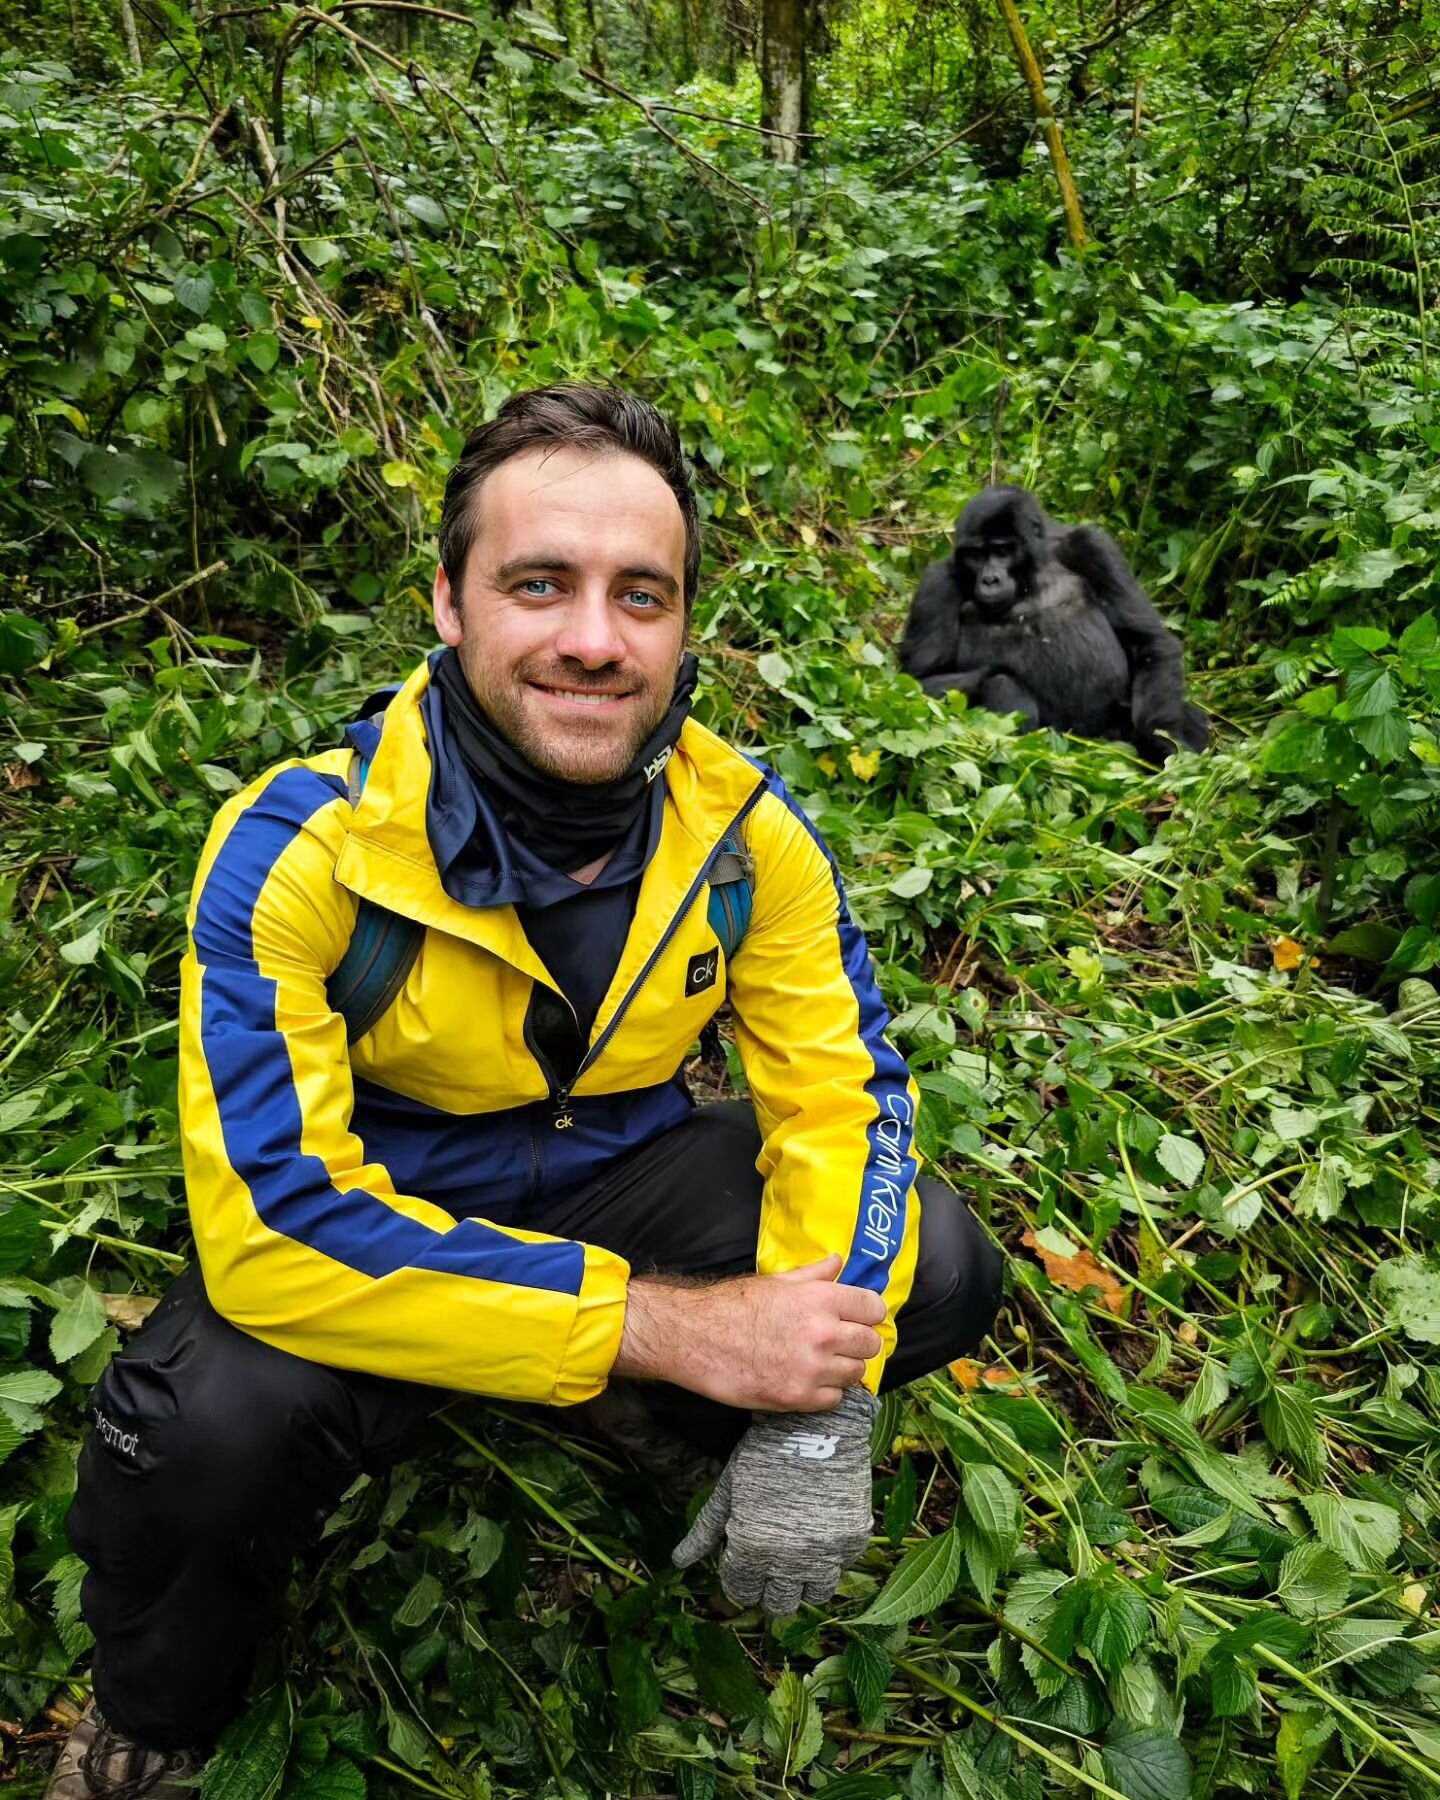 🦍 Uganda's Bwindi Impenetrable Forest is home to half of the world's population of endangered mountain gorillas.

We were fortunate enough to visit a large habituated family of 12 - including two silverback patriarchs - for over an hour. These anima